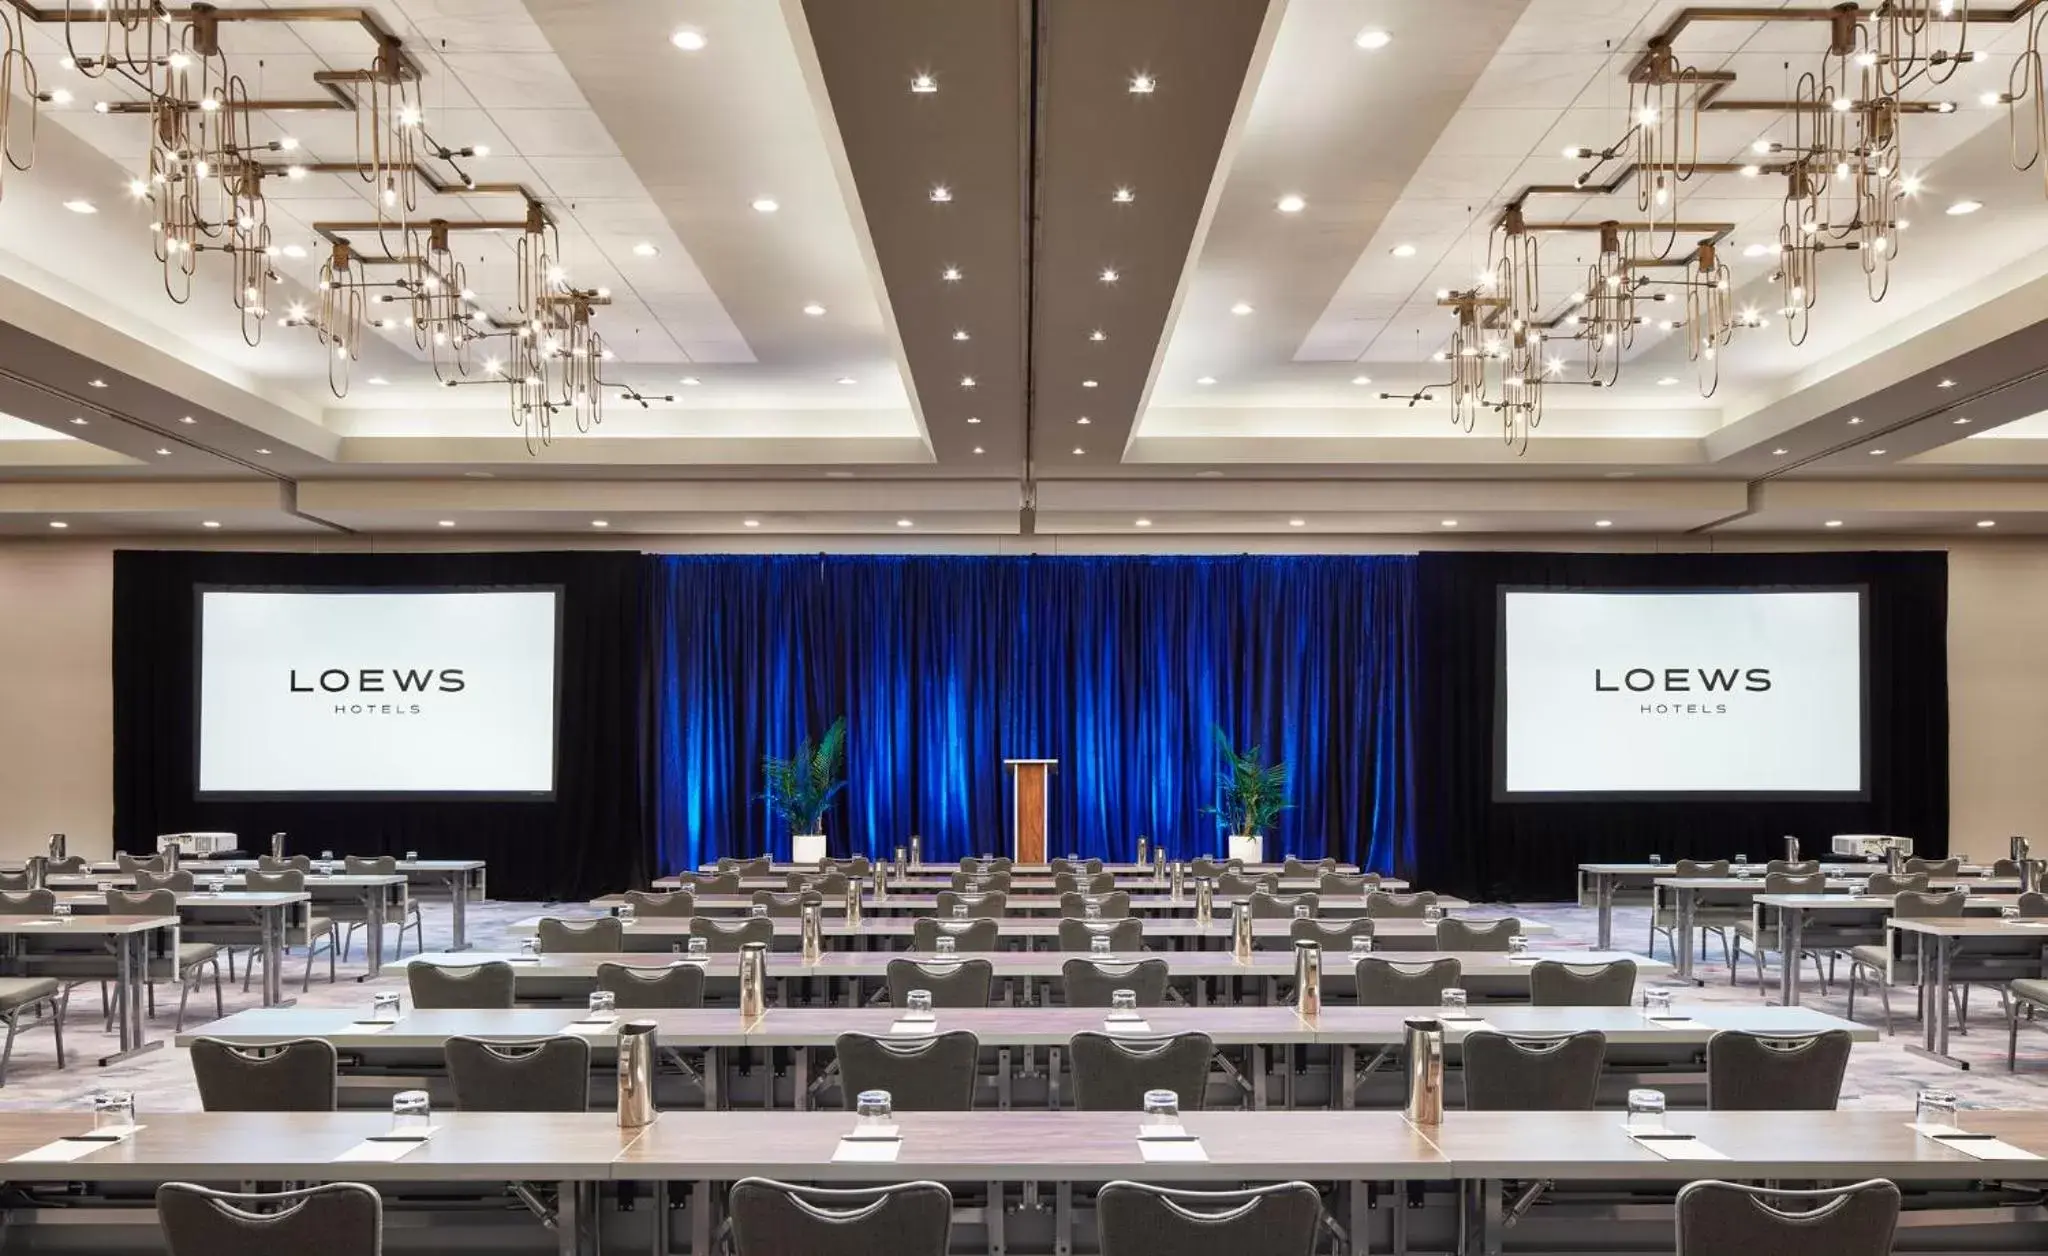 Banquet/Function facilities, Business Area/Conference Room in Loews Minneapolis Hotel